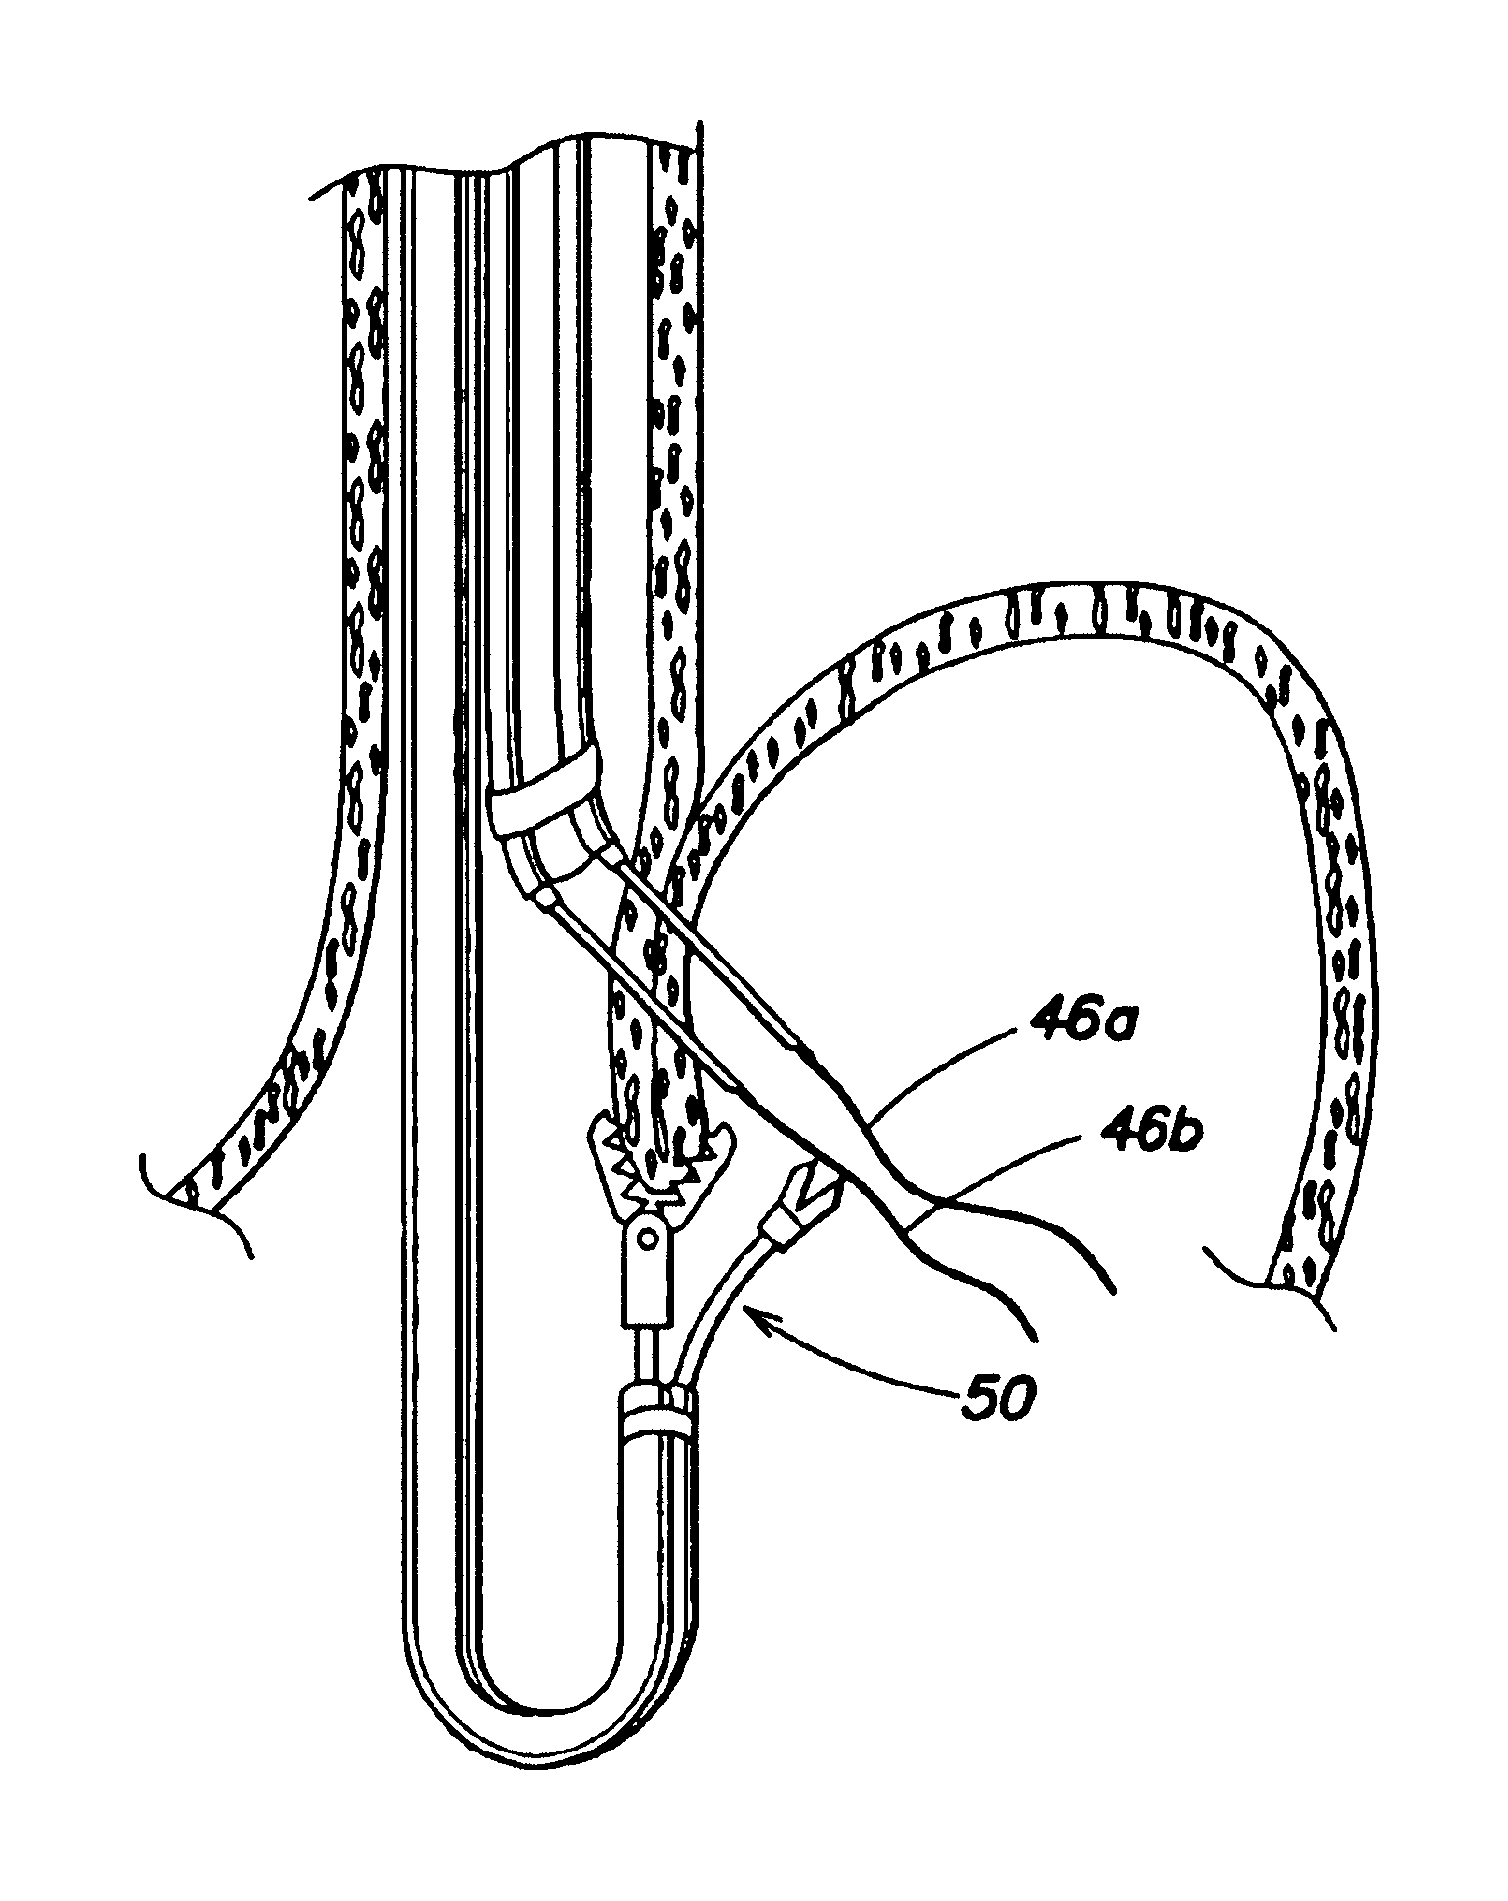 Endoscopic instrument for forming an artificial valve